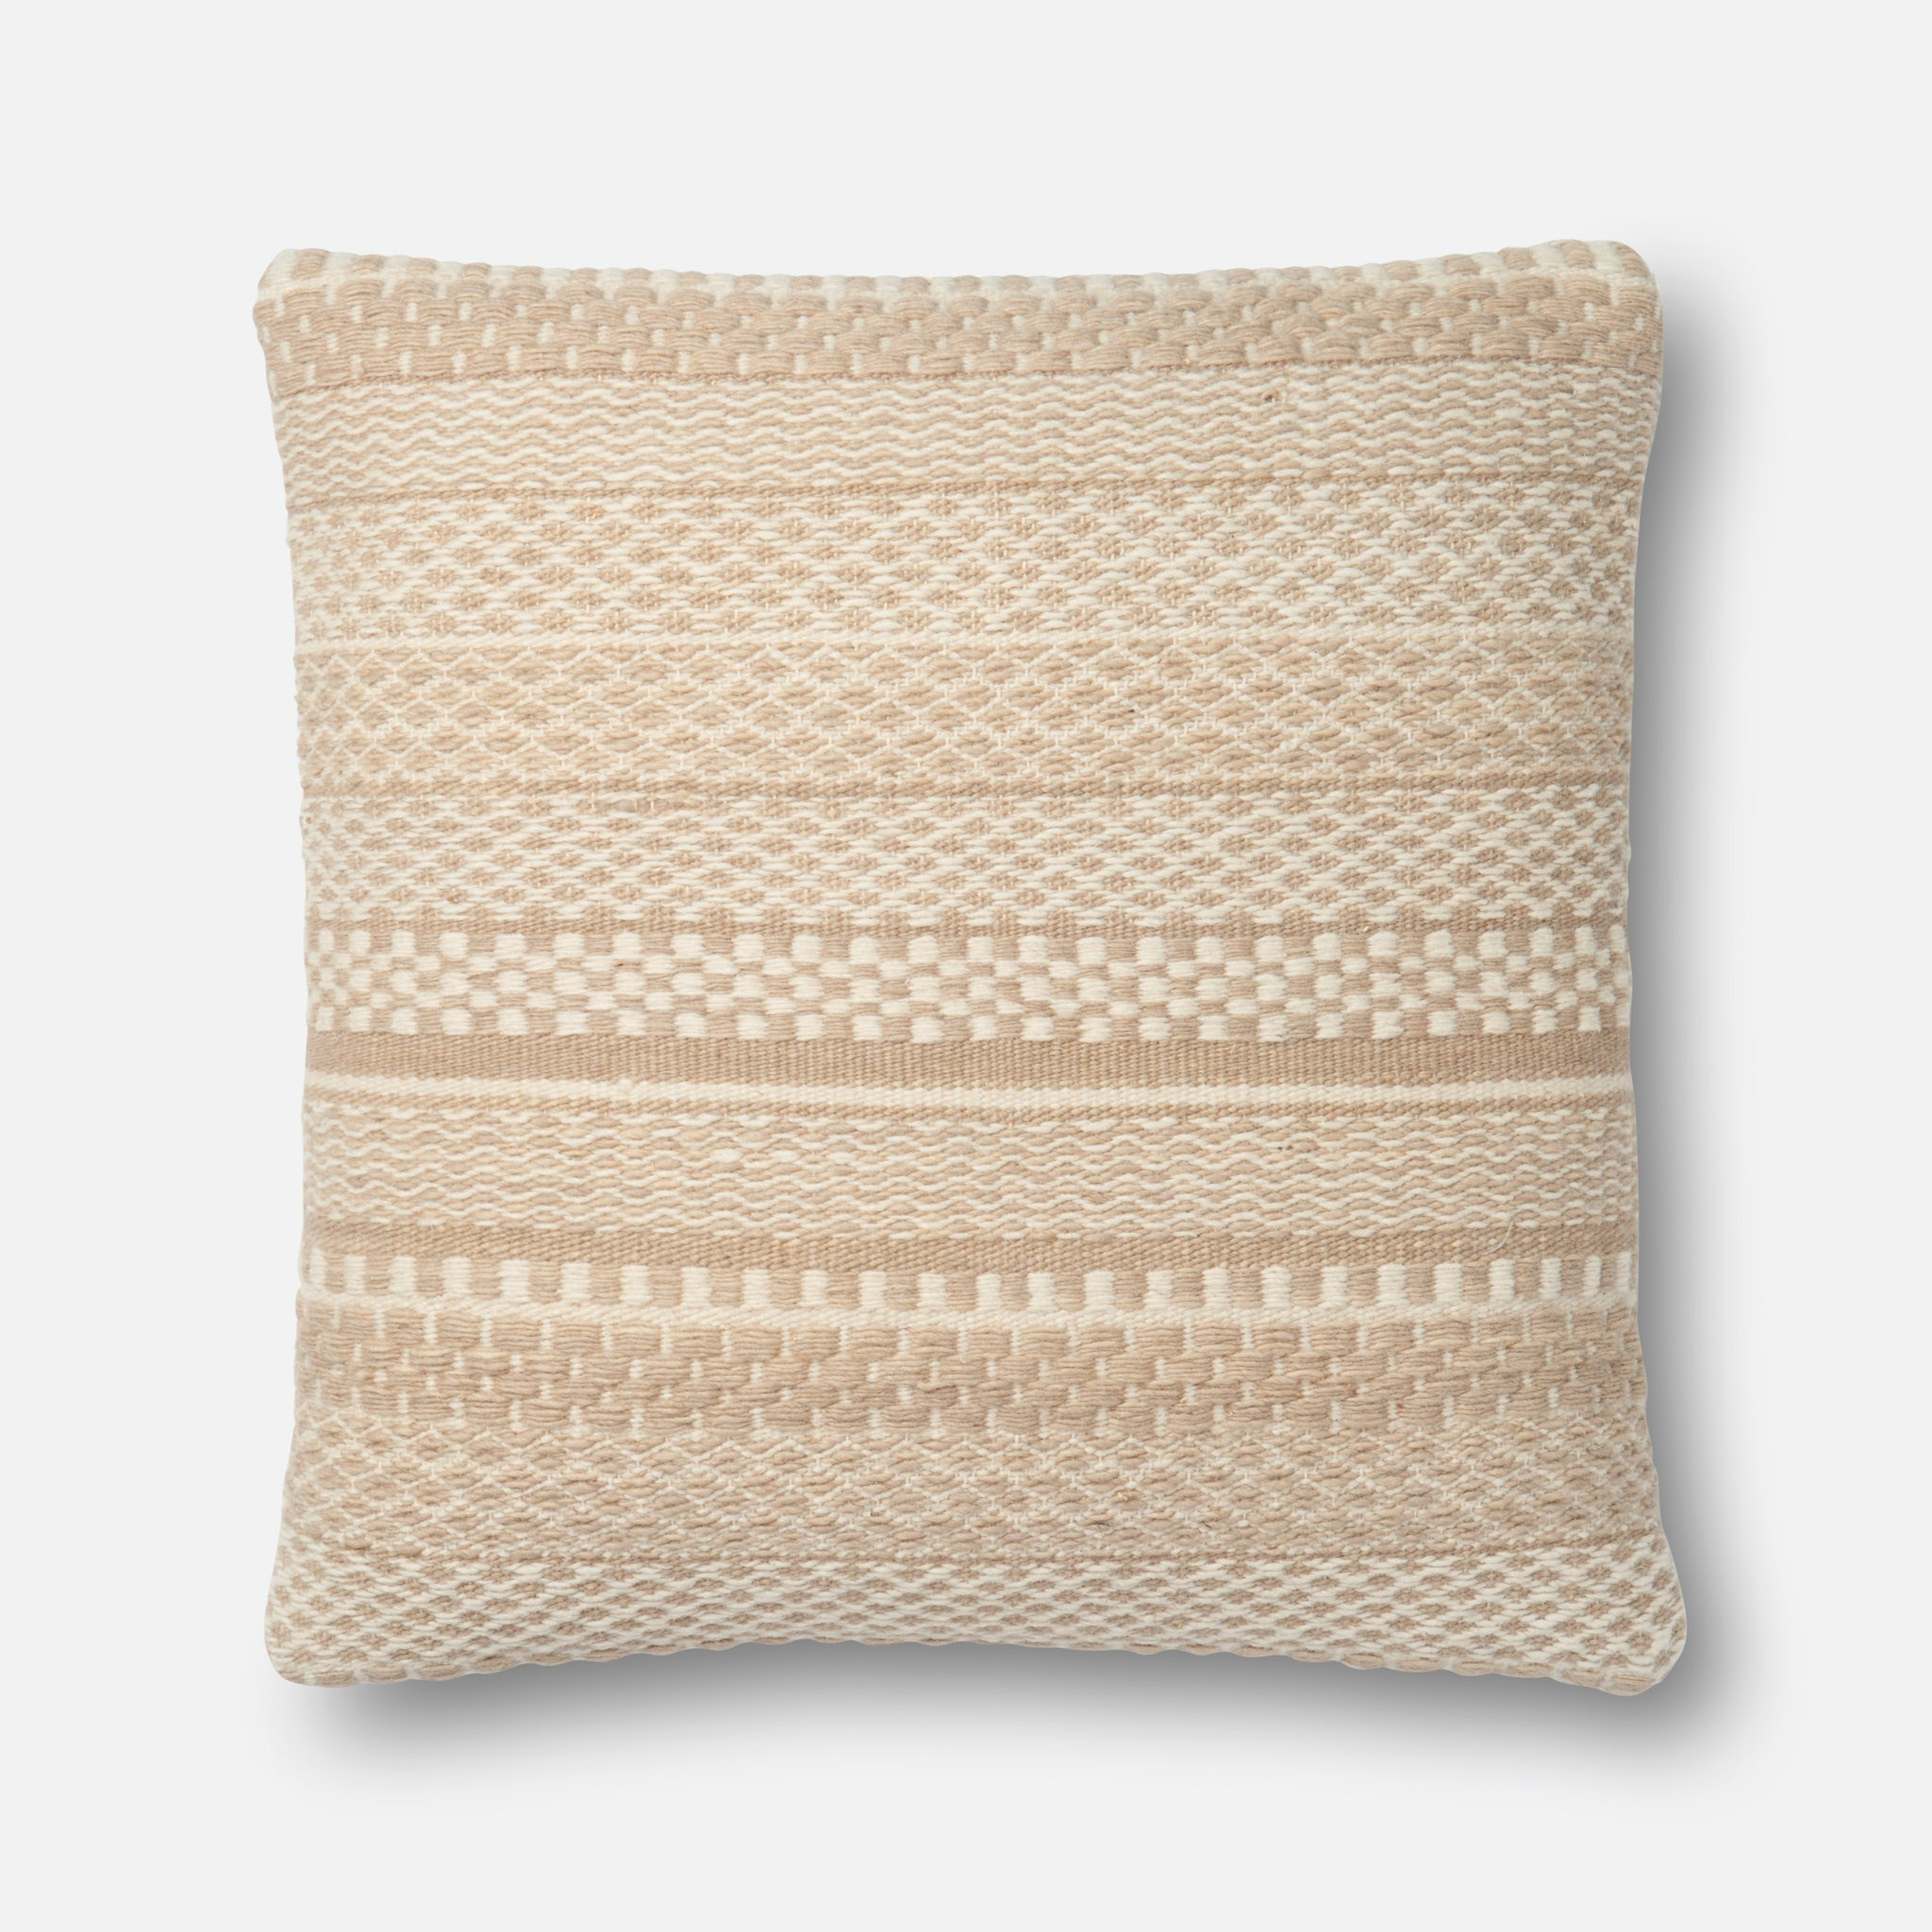 PILLOWS - STRAW - Magnolia Home by Joana Gaines Crafted by Loloi Rugs